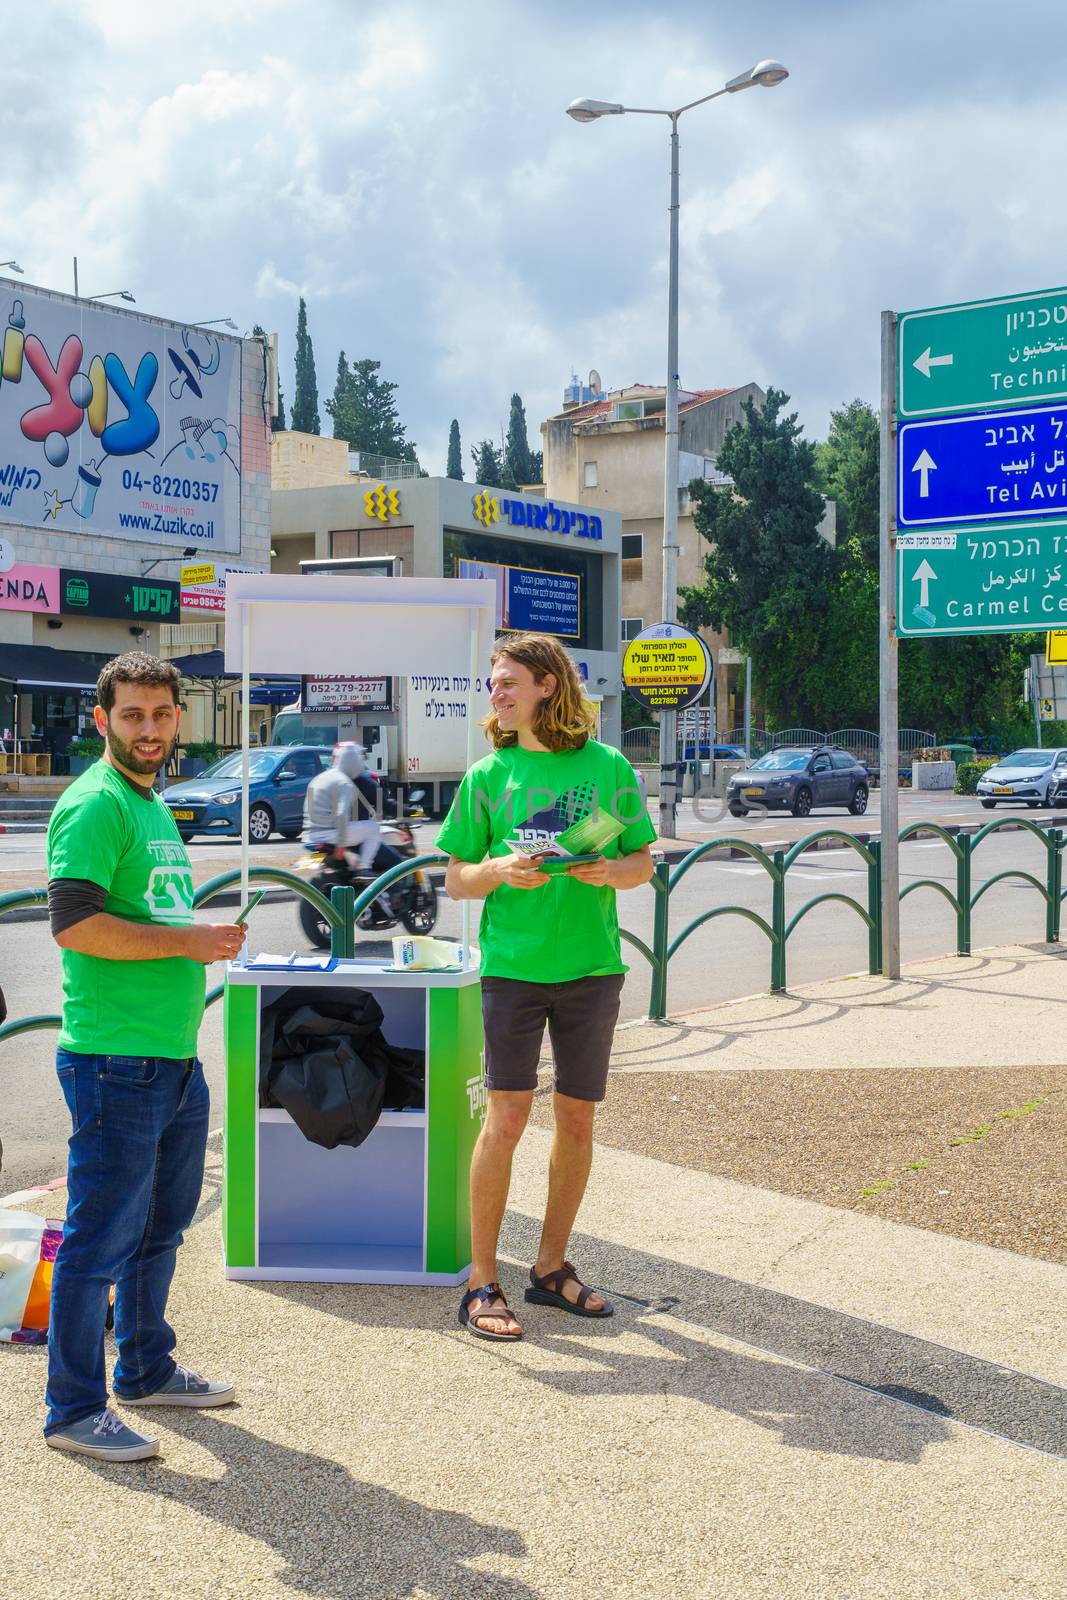 Haifa, Israel - April 05, 2019: Political activists in Ziv square, 4 days before the 2019 elections, in Haifa, Israel